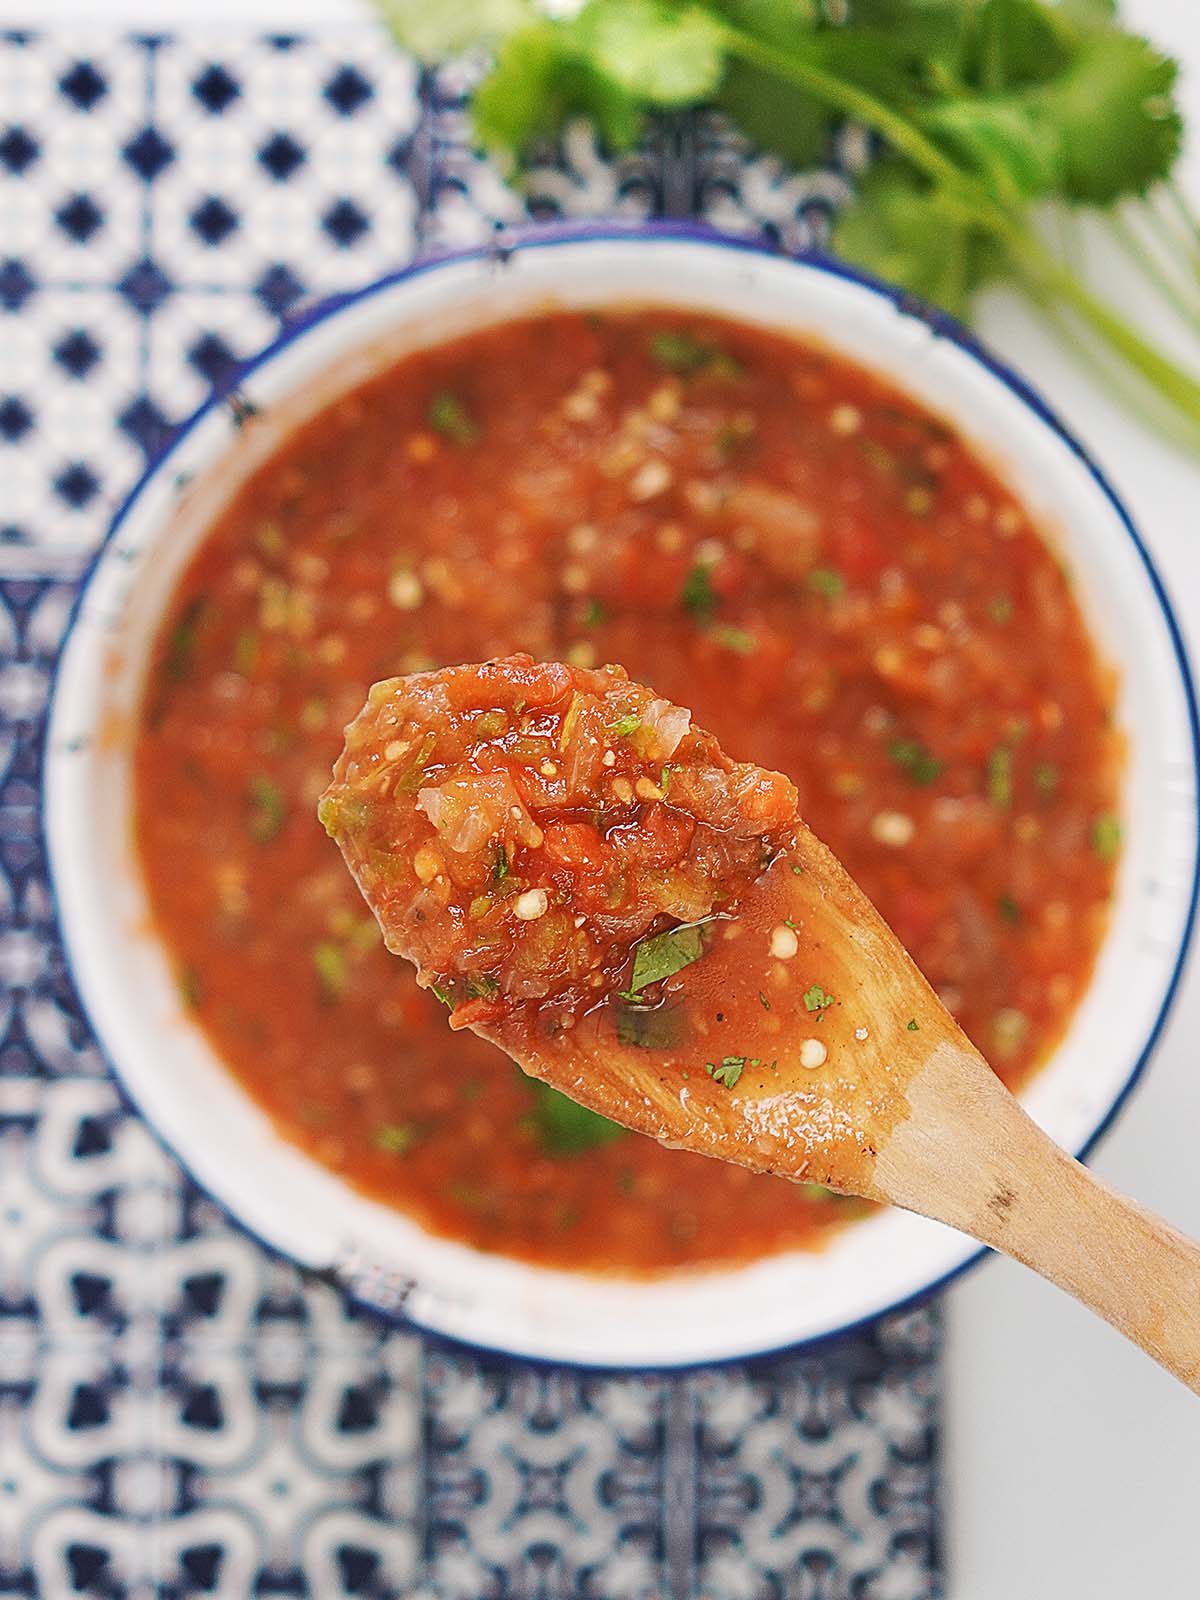 A bowl of red salsa placed on top of blue decorative tiles with a wood spoon. .